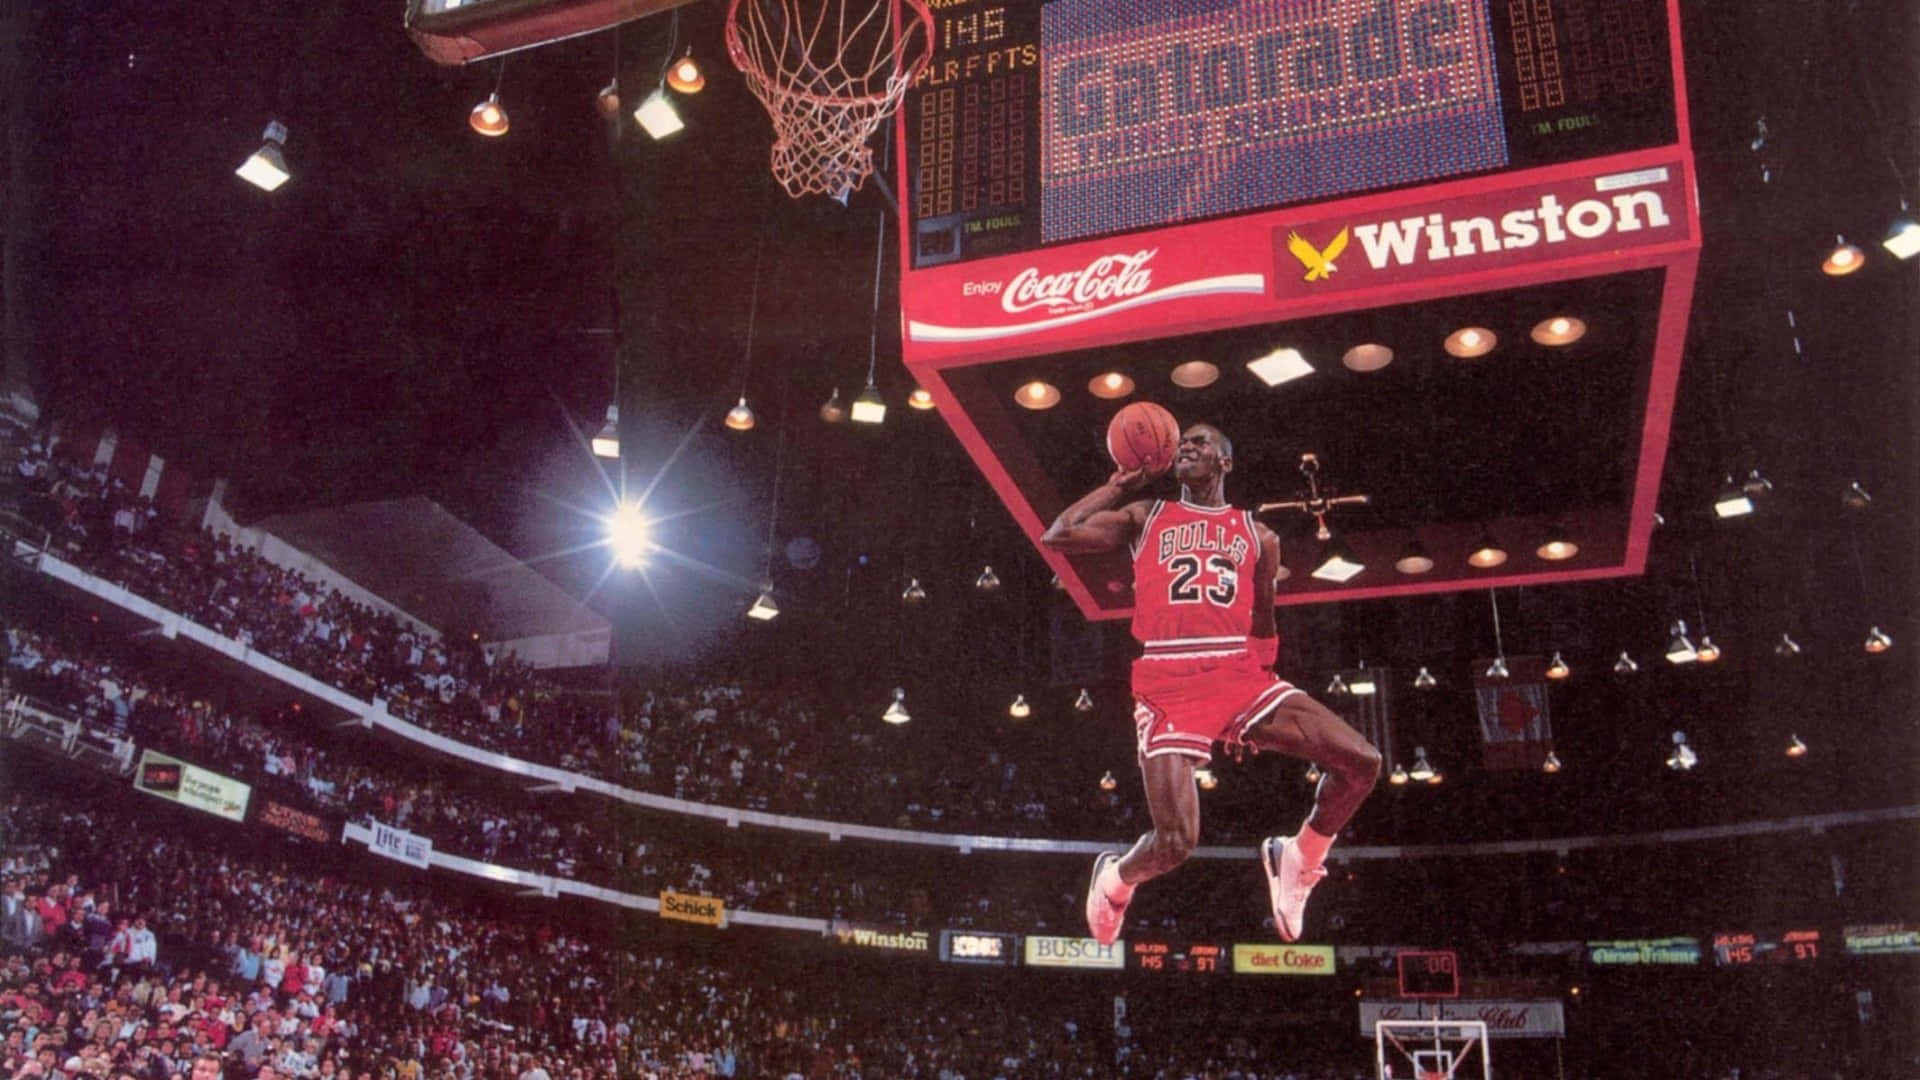 Add Some Color to Your Sneaker Game with Red Jordan Wallpaper